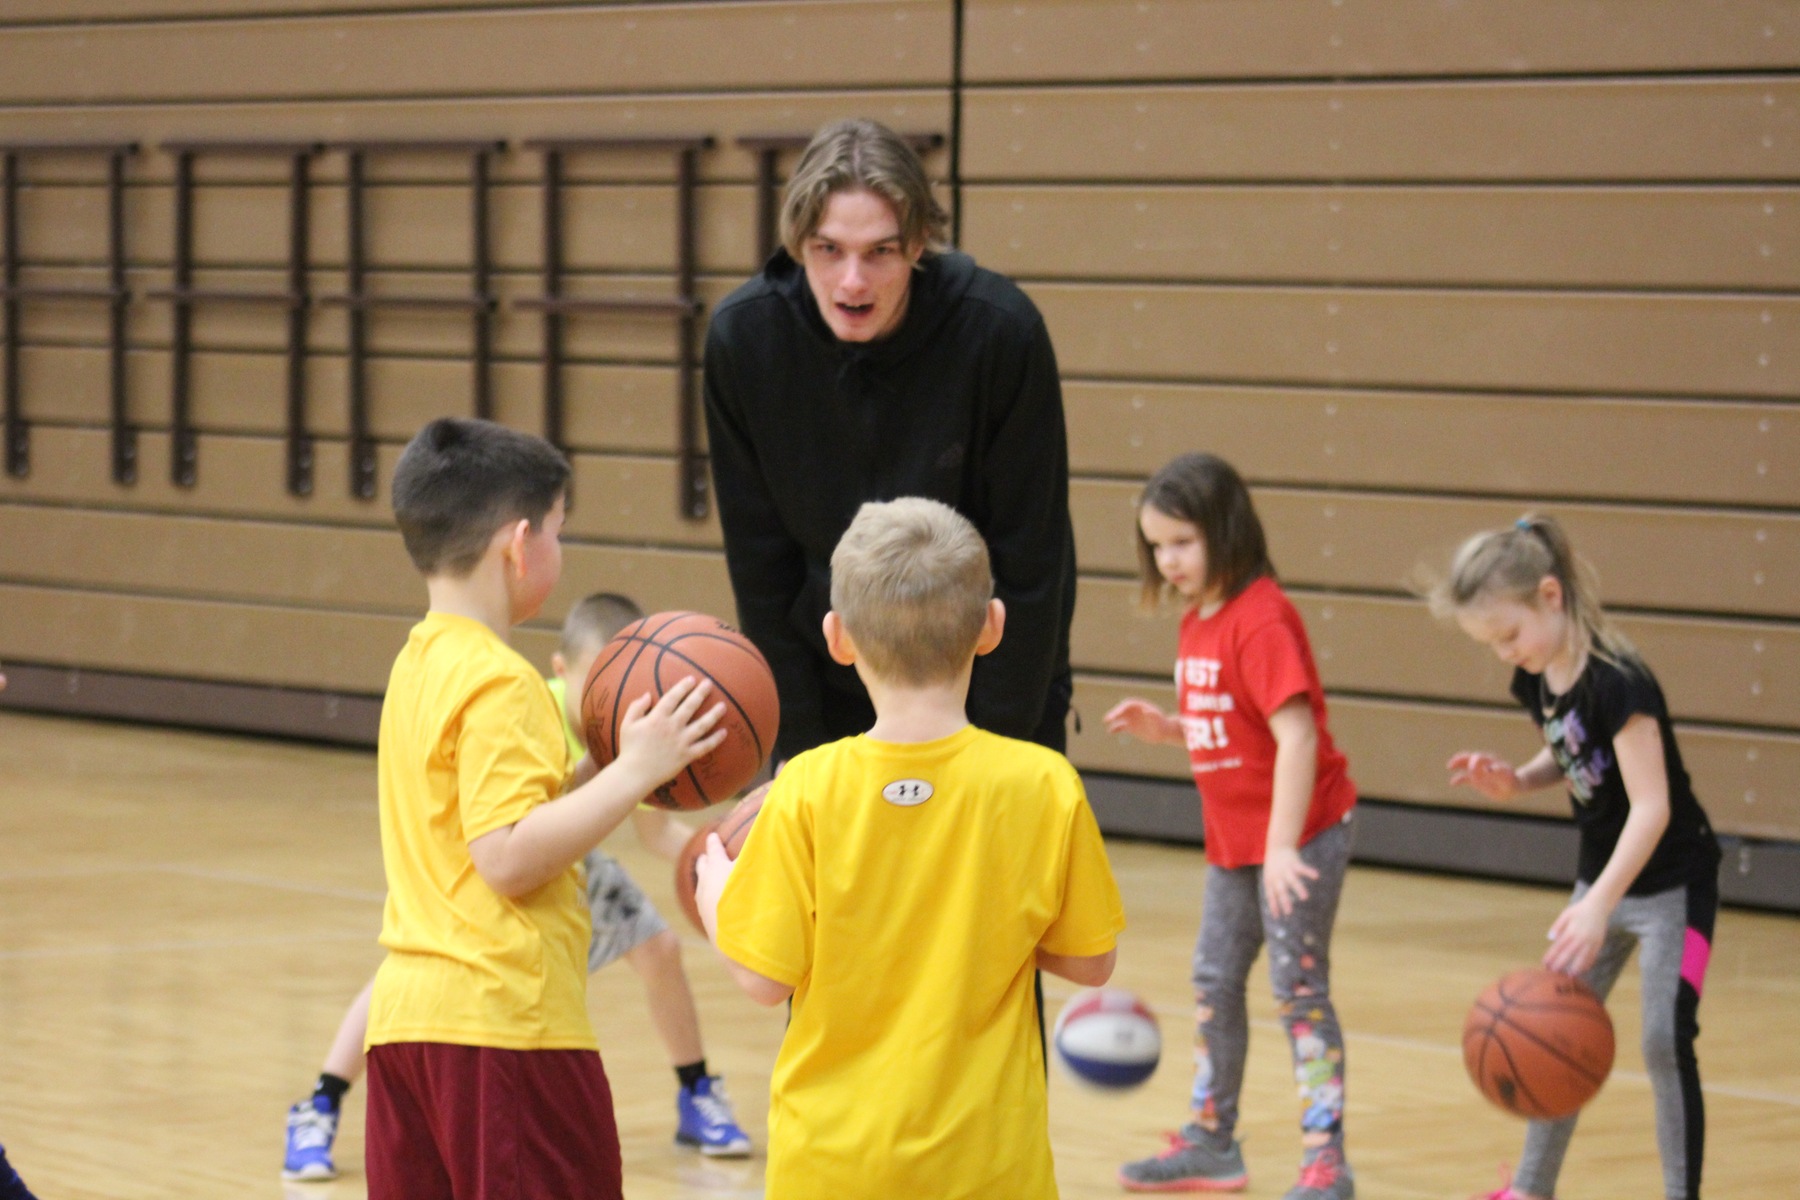 NIACC men's basketball player Raymond Harding helps at the Mason City Parks and Recreation clinic Wednesday morning in the NIACC gym.